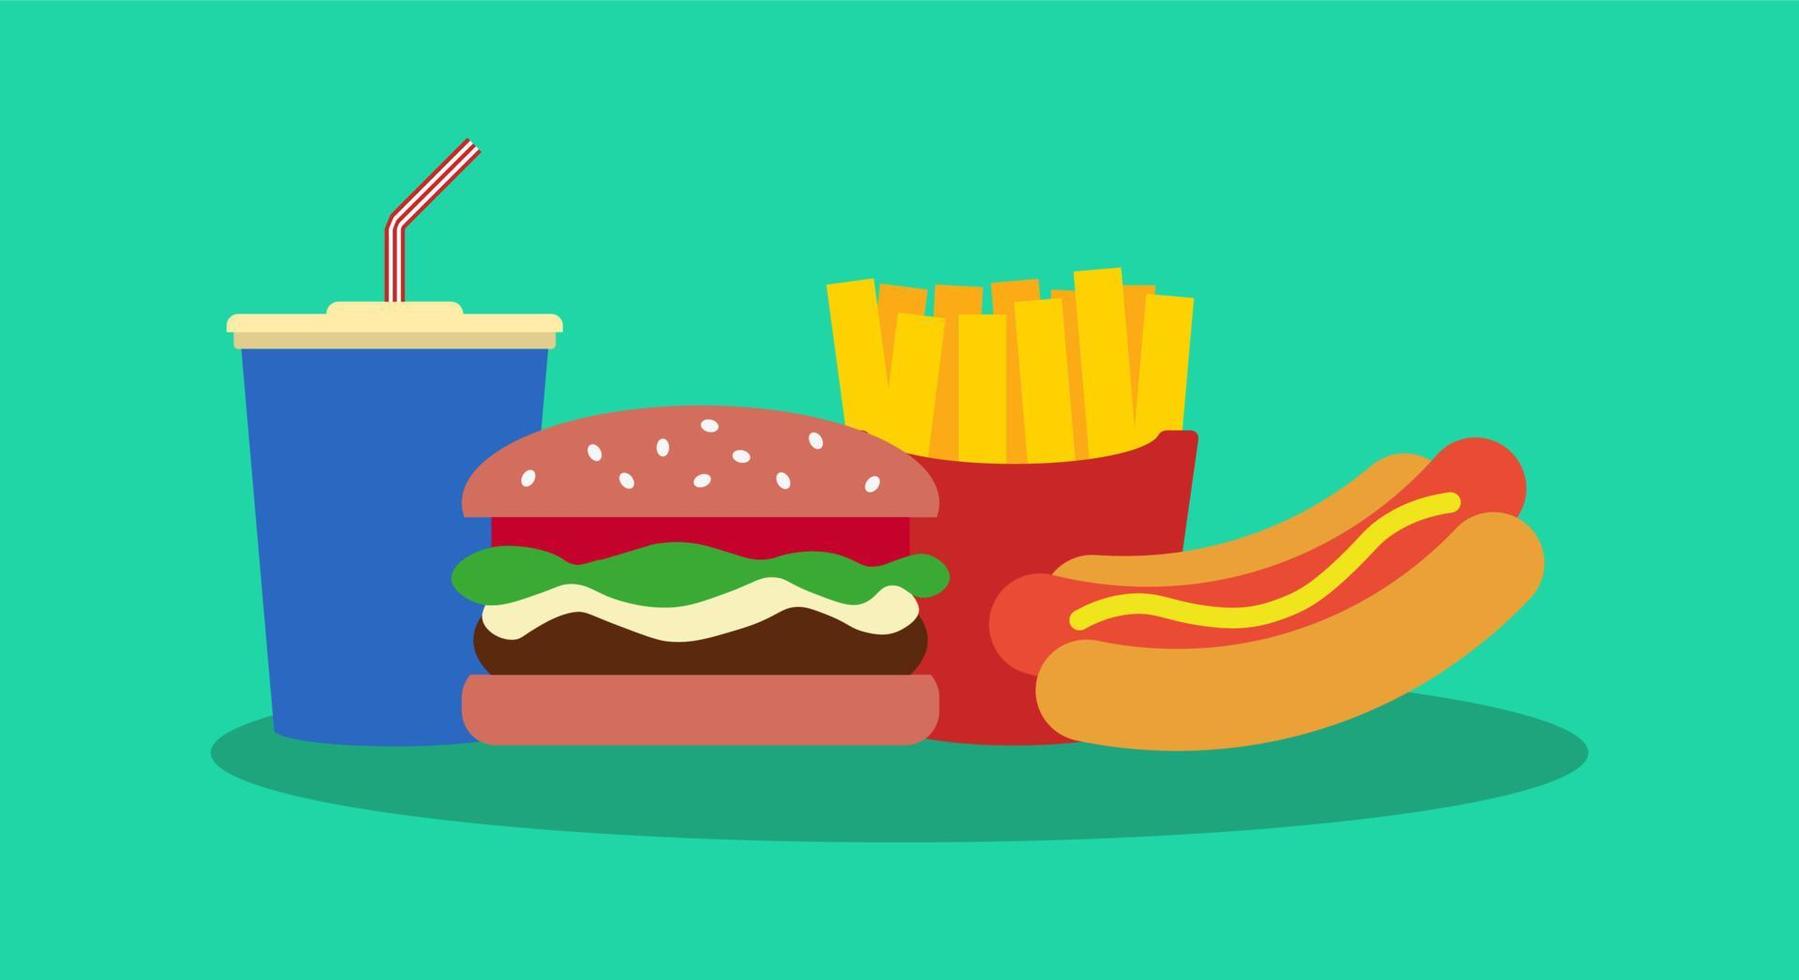 Fast food vector illustration. Junk food icon. Hot dog, french fries, hamburger and soft drink